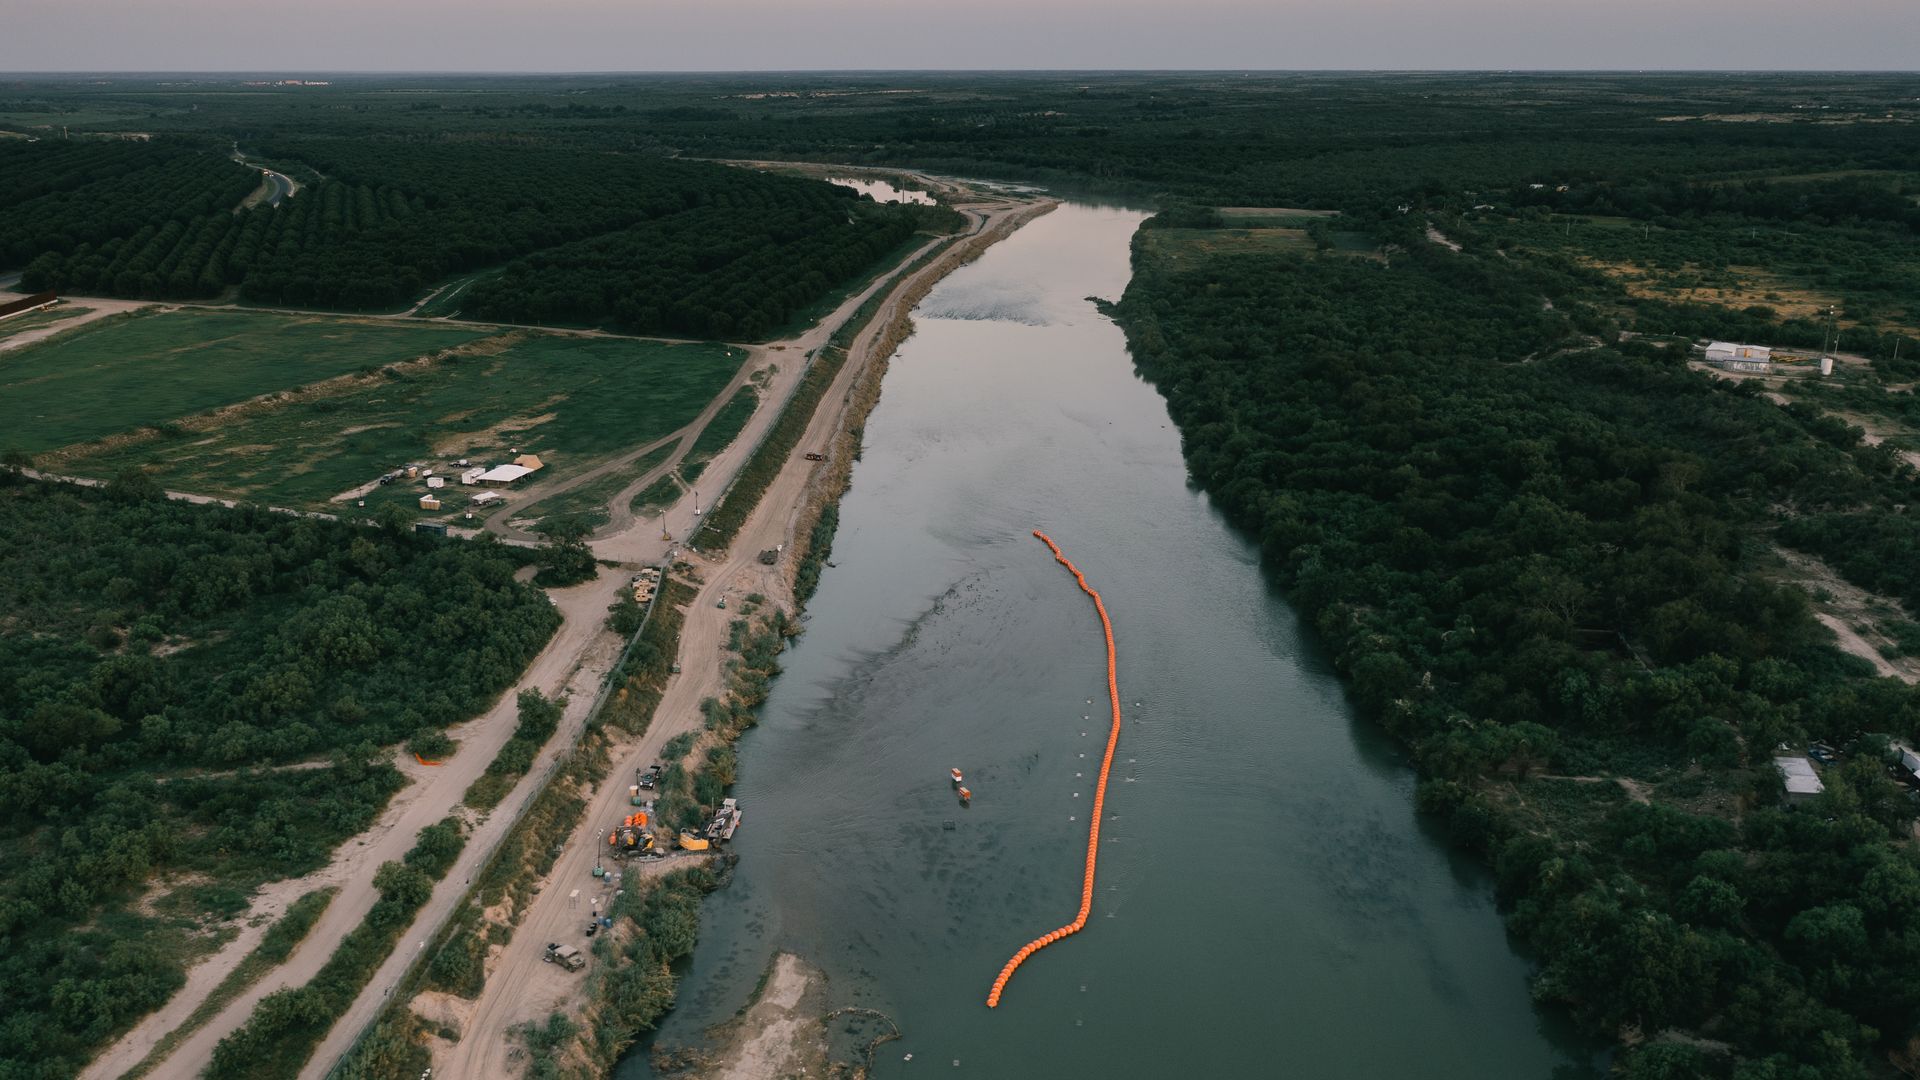  A string of buoys used as a border barrier on the Rio Grande River in Eagle Pass, Texas, US, on Thursday, July 13, 2023. Texas started deploying a new floating barrier on the Rio Grande as a way to deter migrant crossings at the US-Mexico border. 